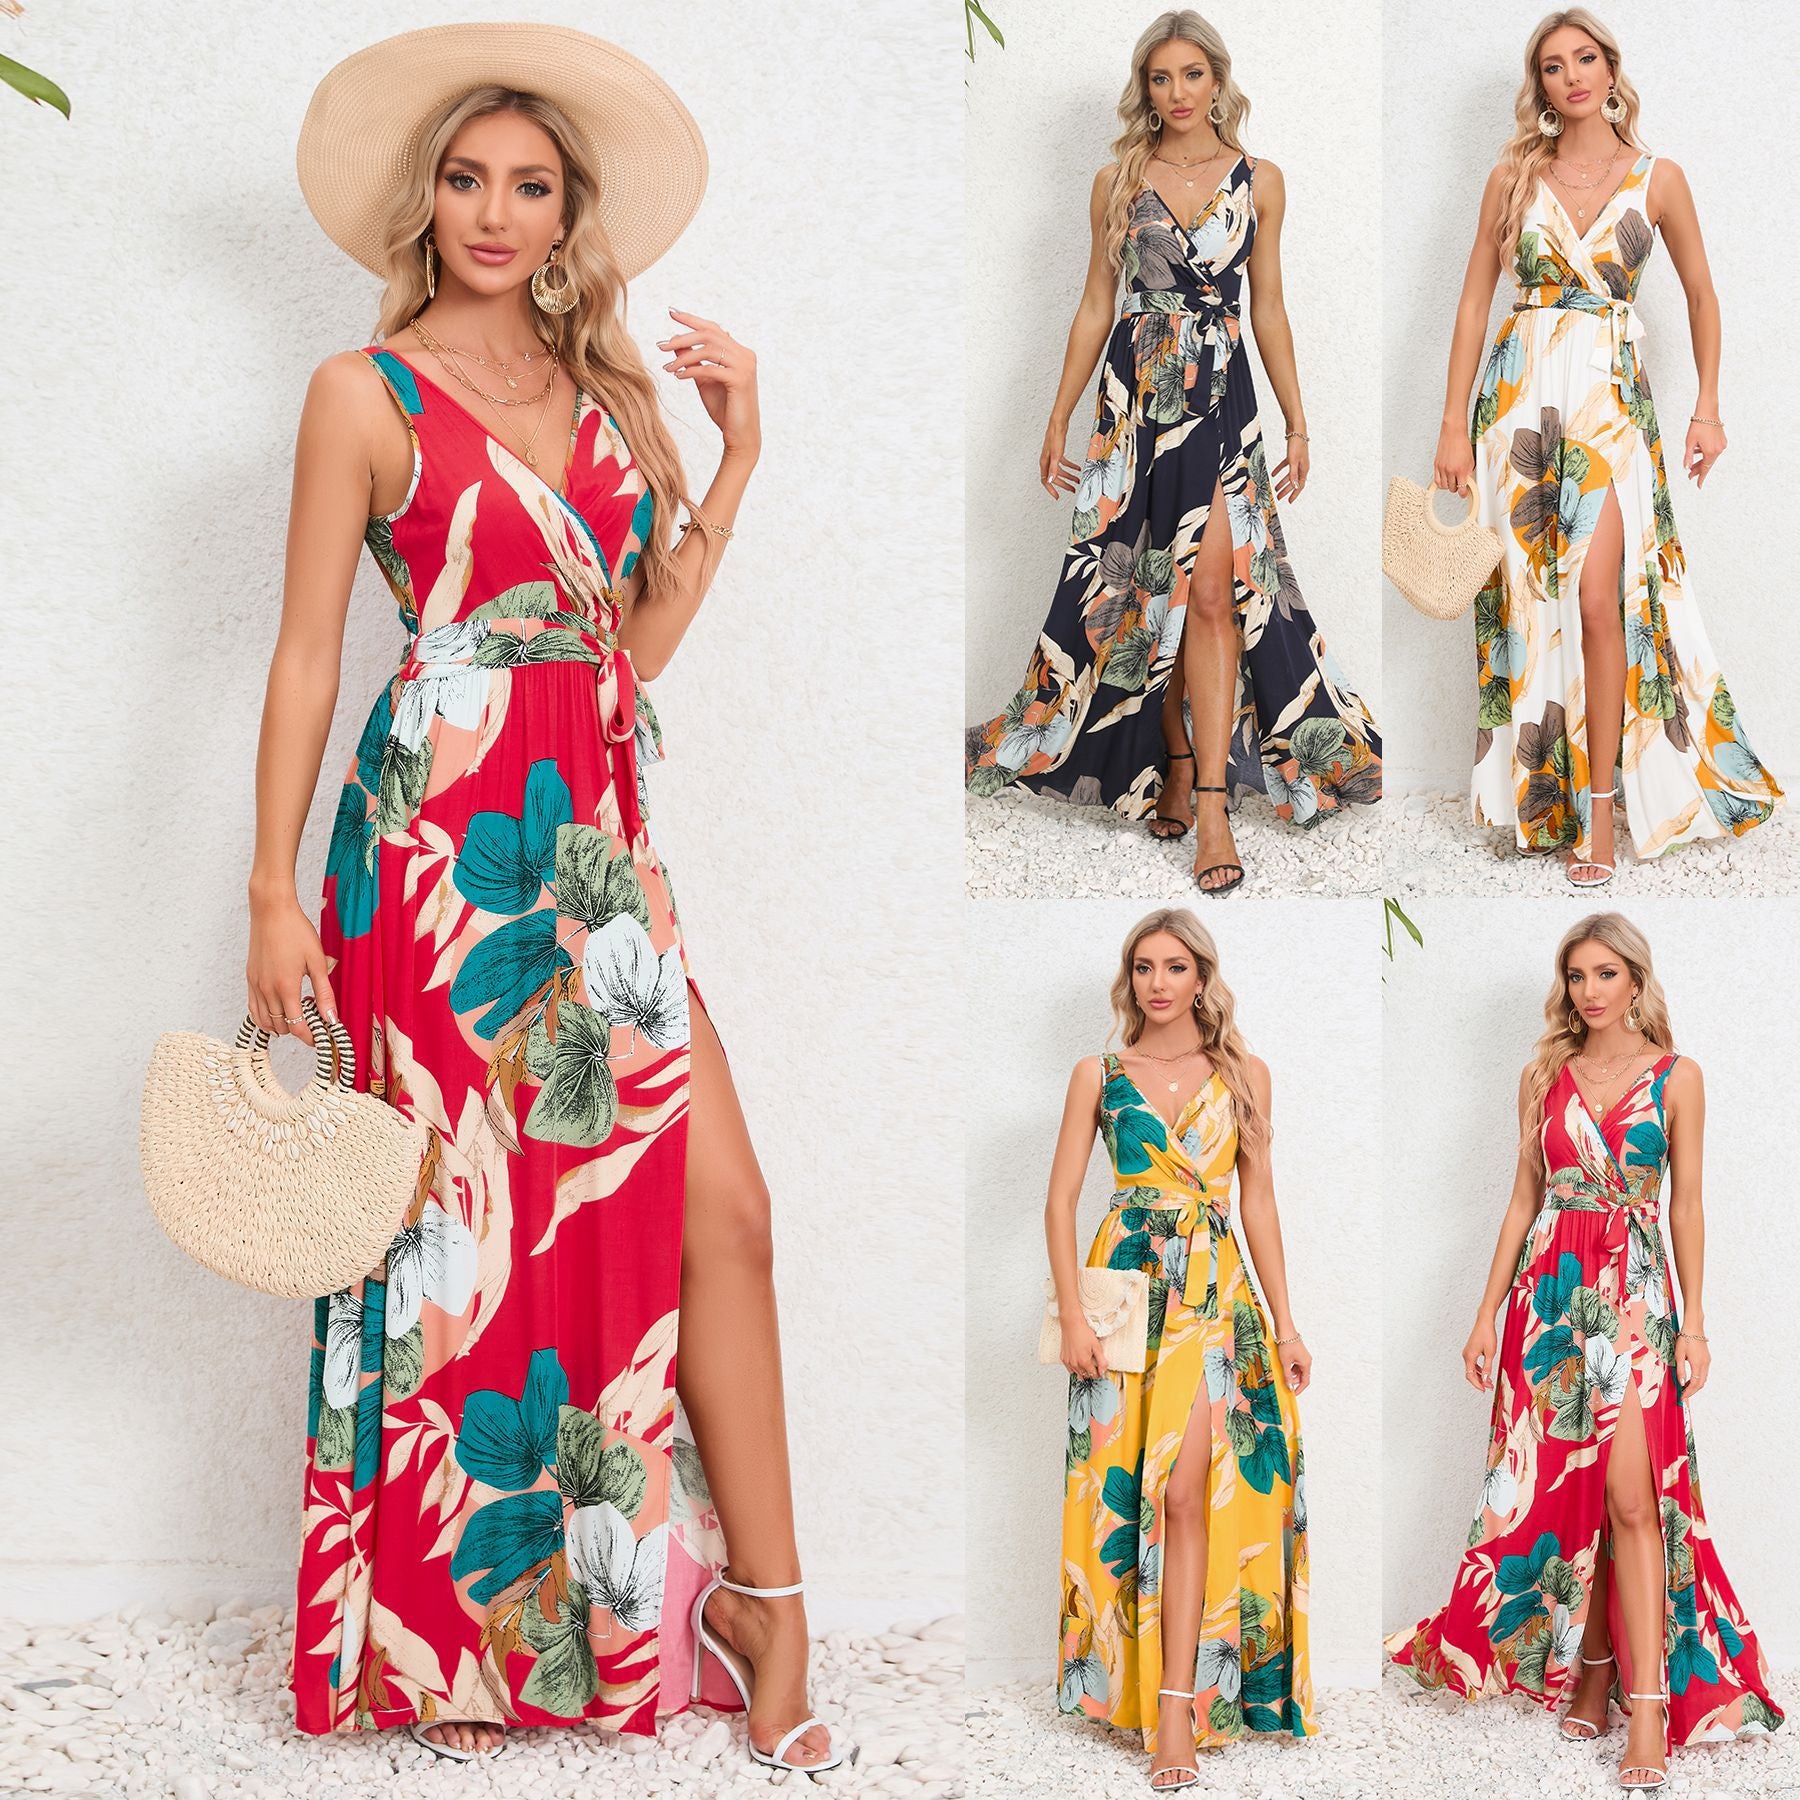 Floral Print V-neck Long Dress Summer Fashion with Waist Tie and Sleeveless Design